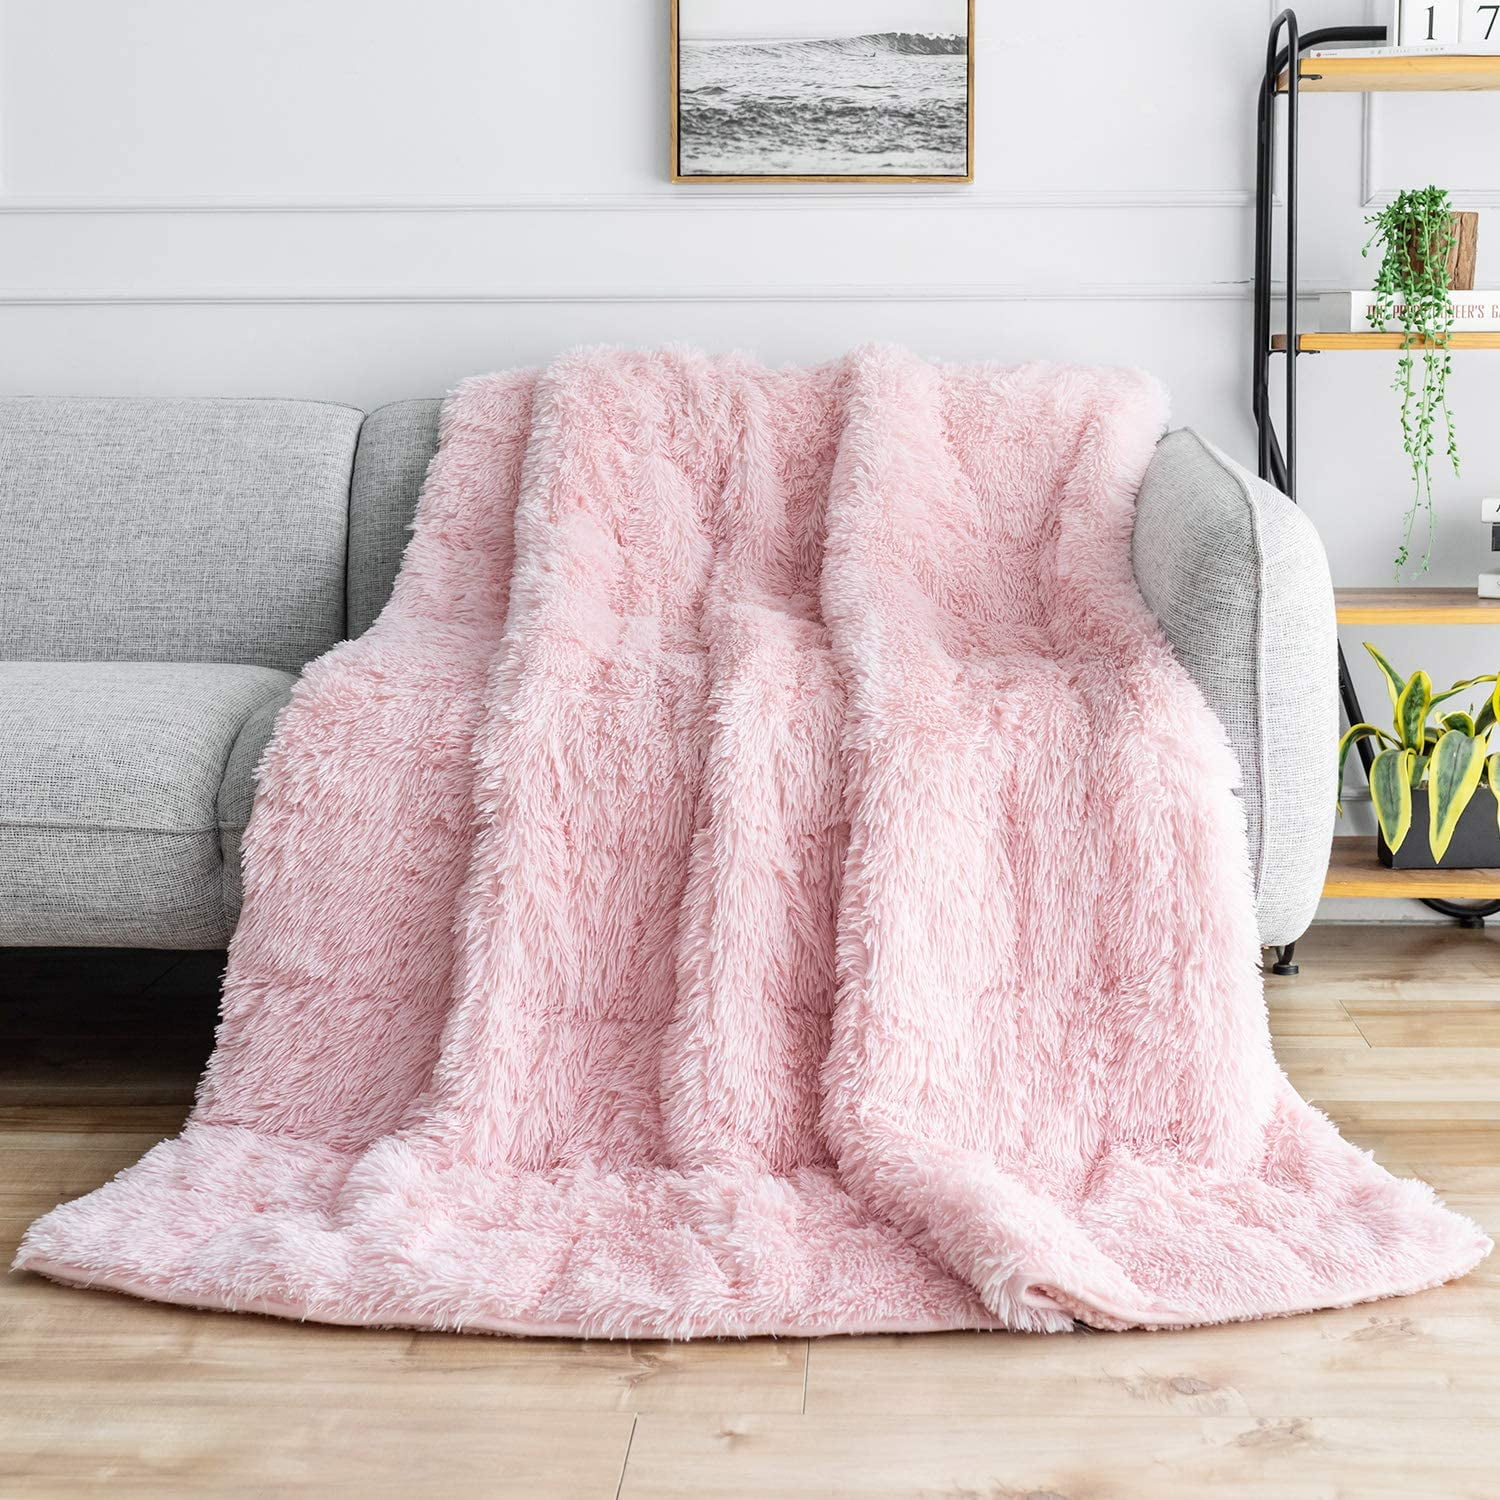 Softlife Faux Wool Weighted Blanket Adult15lbs Shaggy Heavy Throw Blanket With Fuzzy Sherpa 